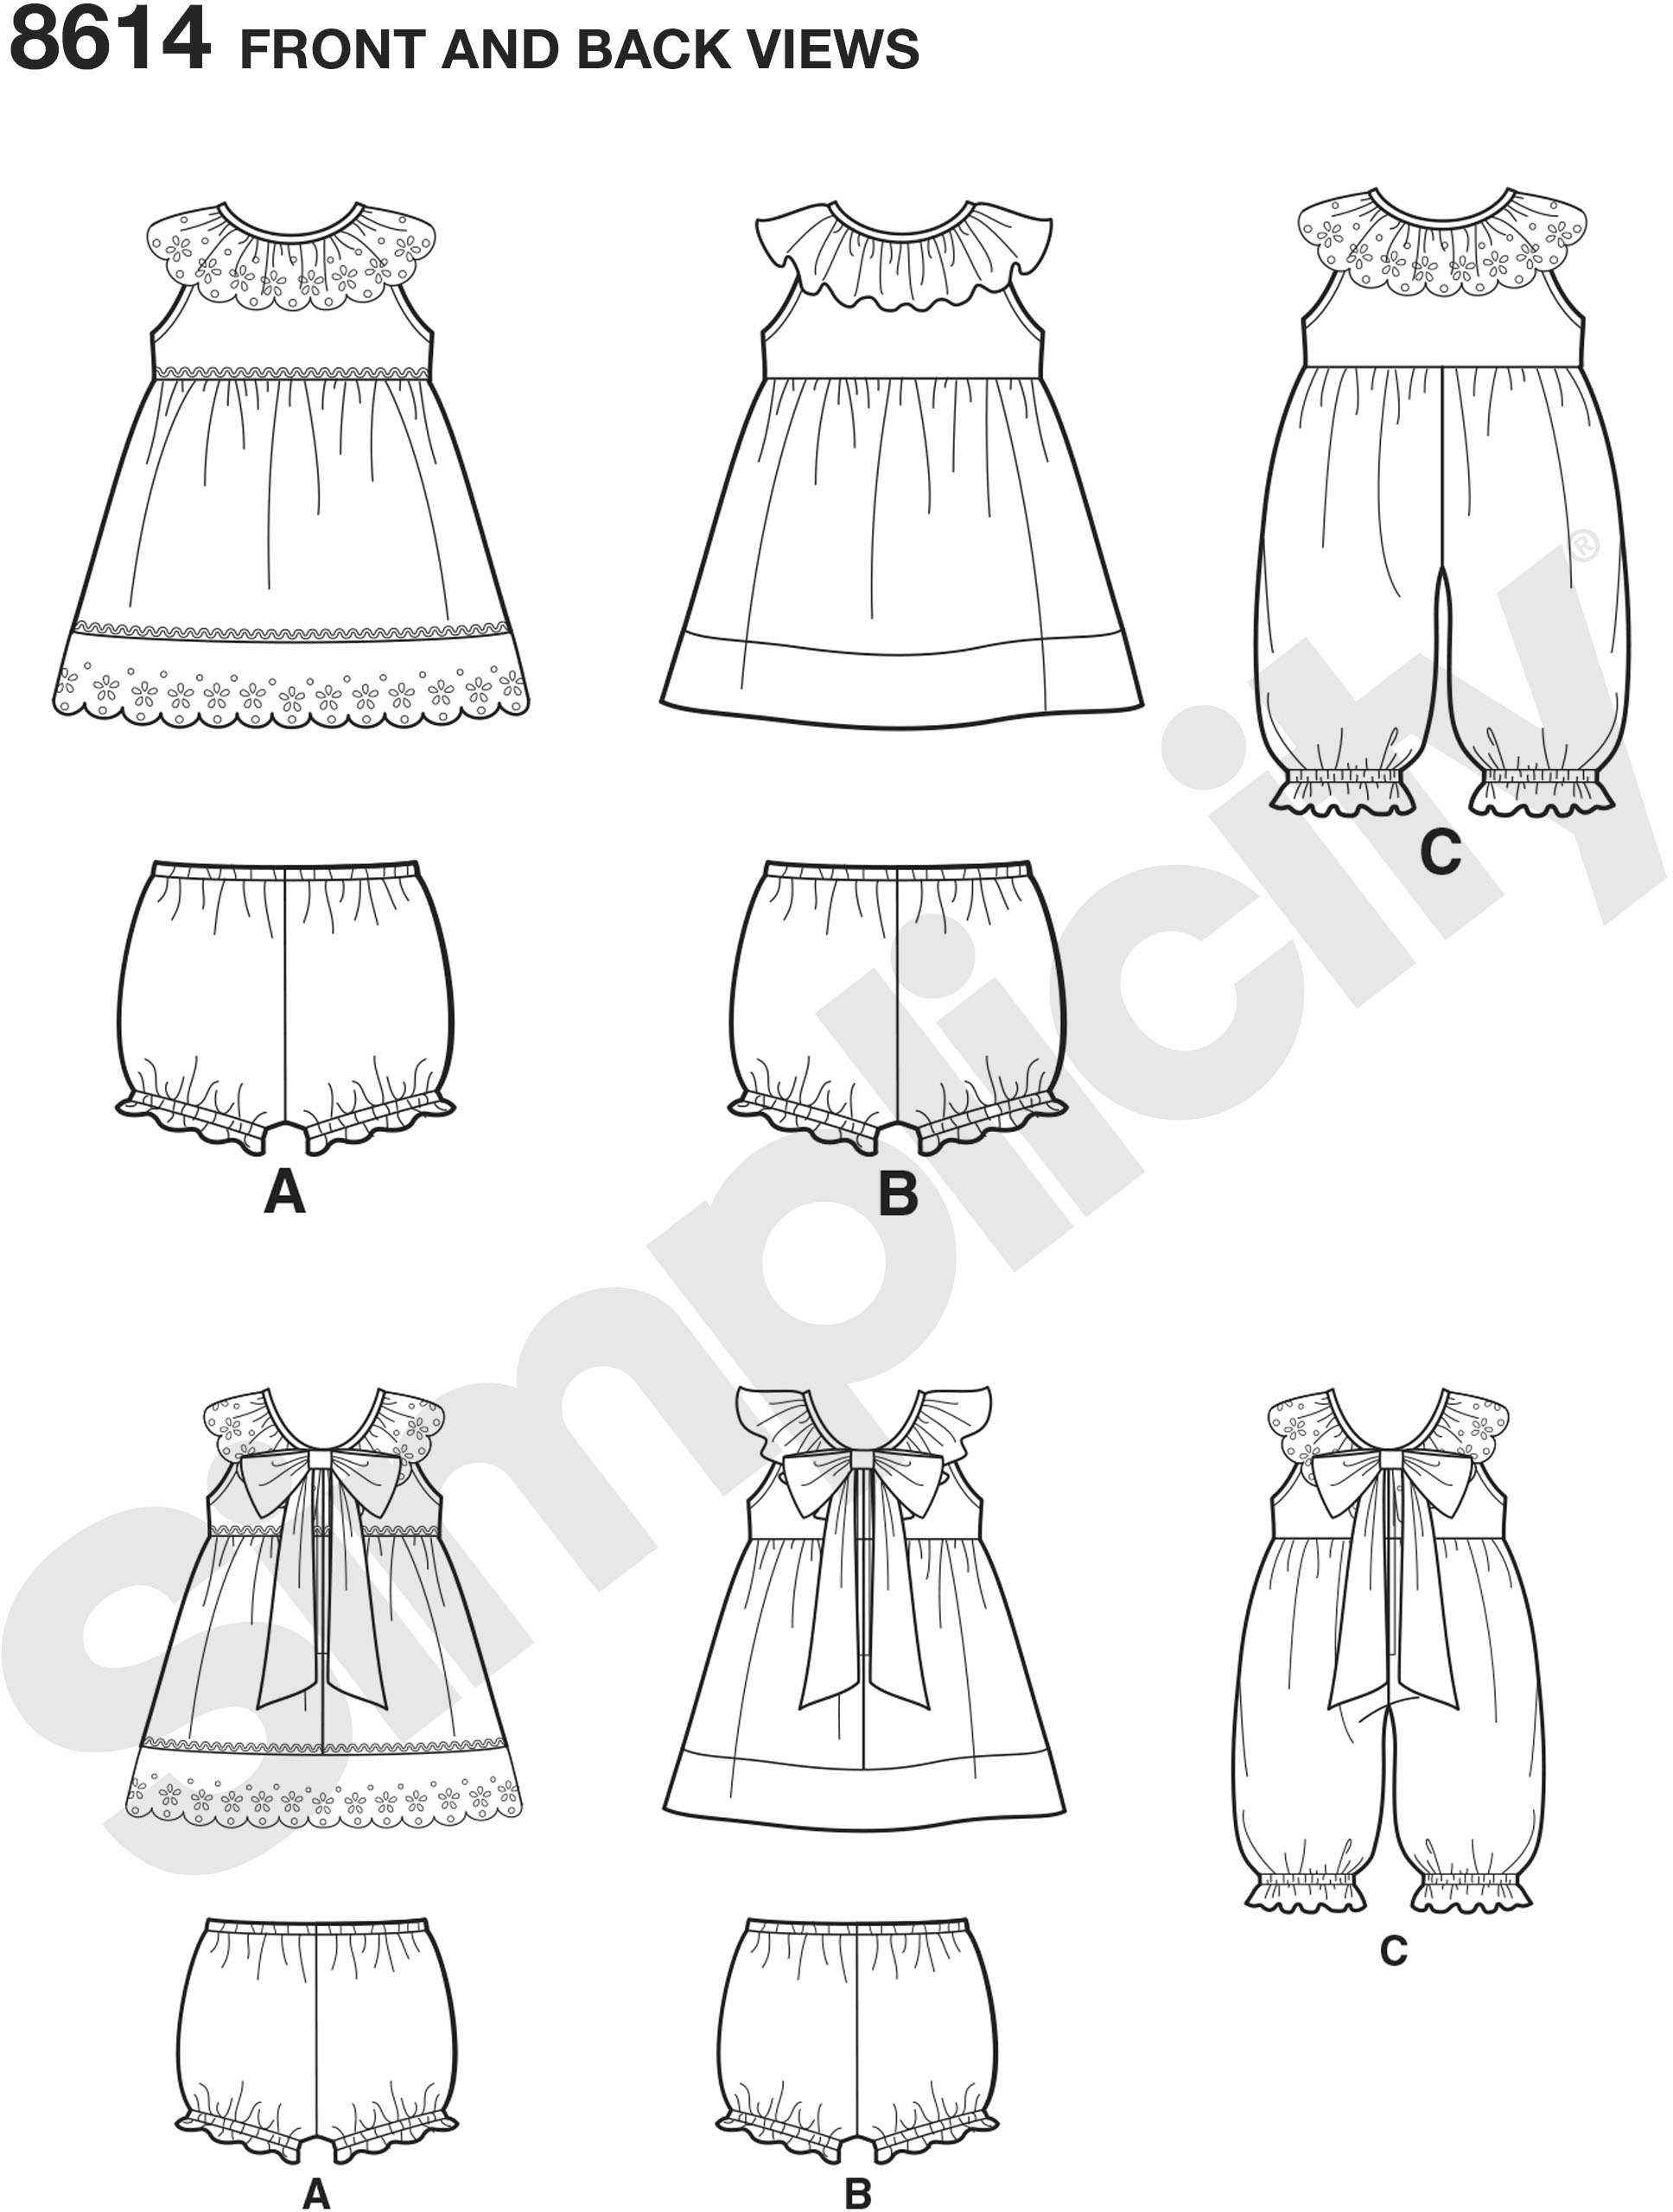 Create adorable outfits for Baby this spring with a sweet dress, romper and panties. This pattern features ruffles, rickrack trim, and a back bow interest.